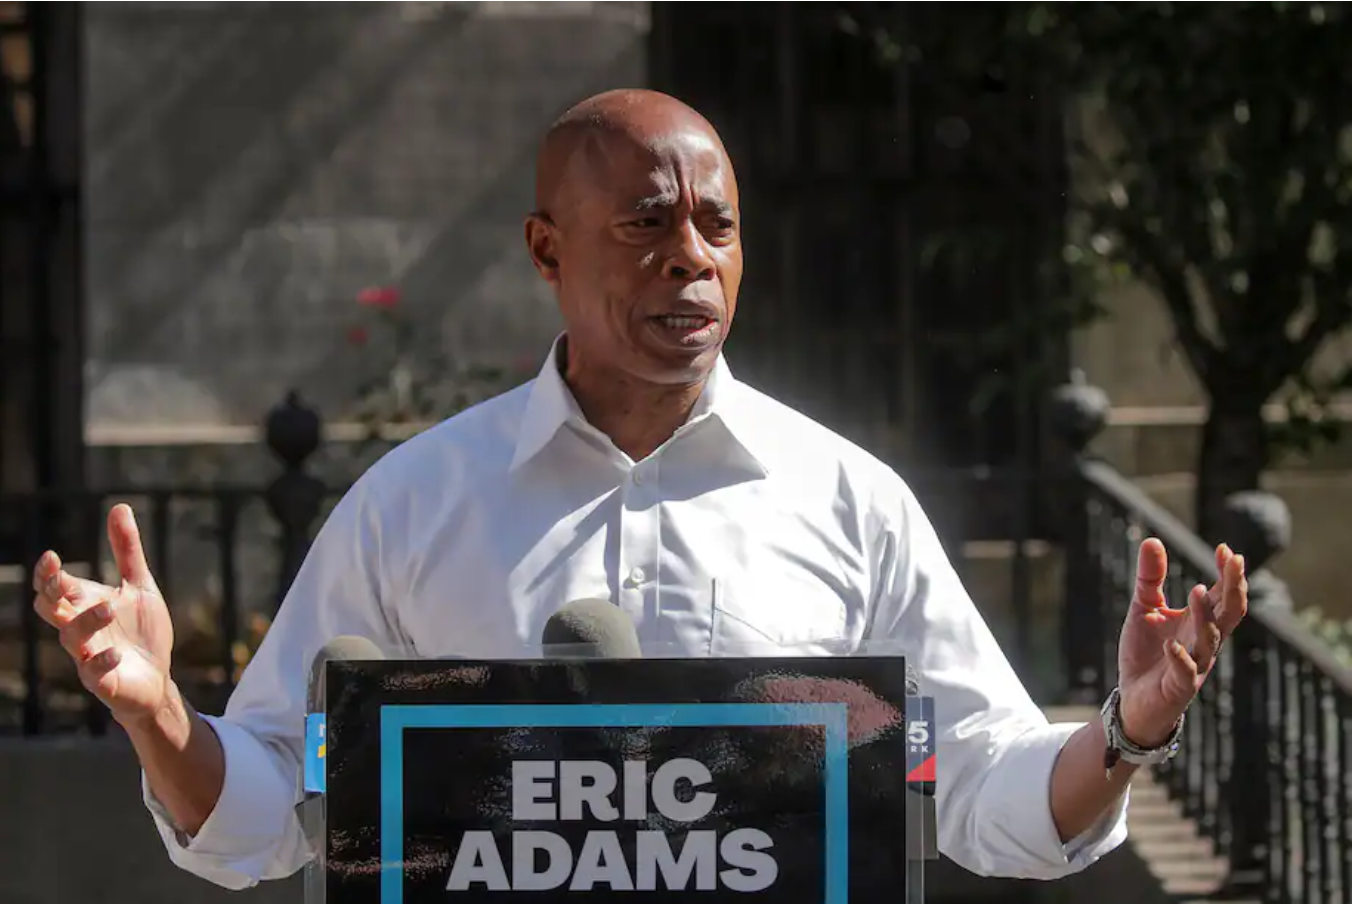 Eric Adams, Brooklyn borough president and Democratic candidate for New York mayor, speaks during a news conference in Brooklyn on June 24. (Brendan Mcdermid/Reuters)